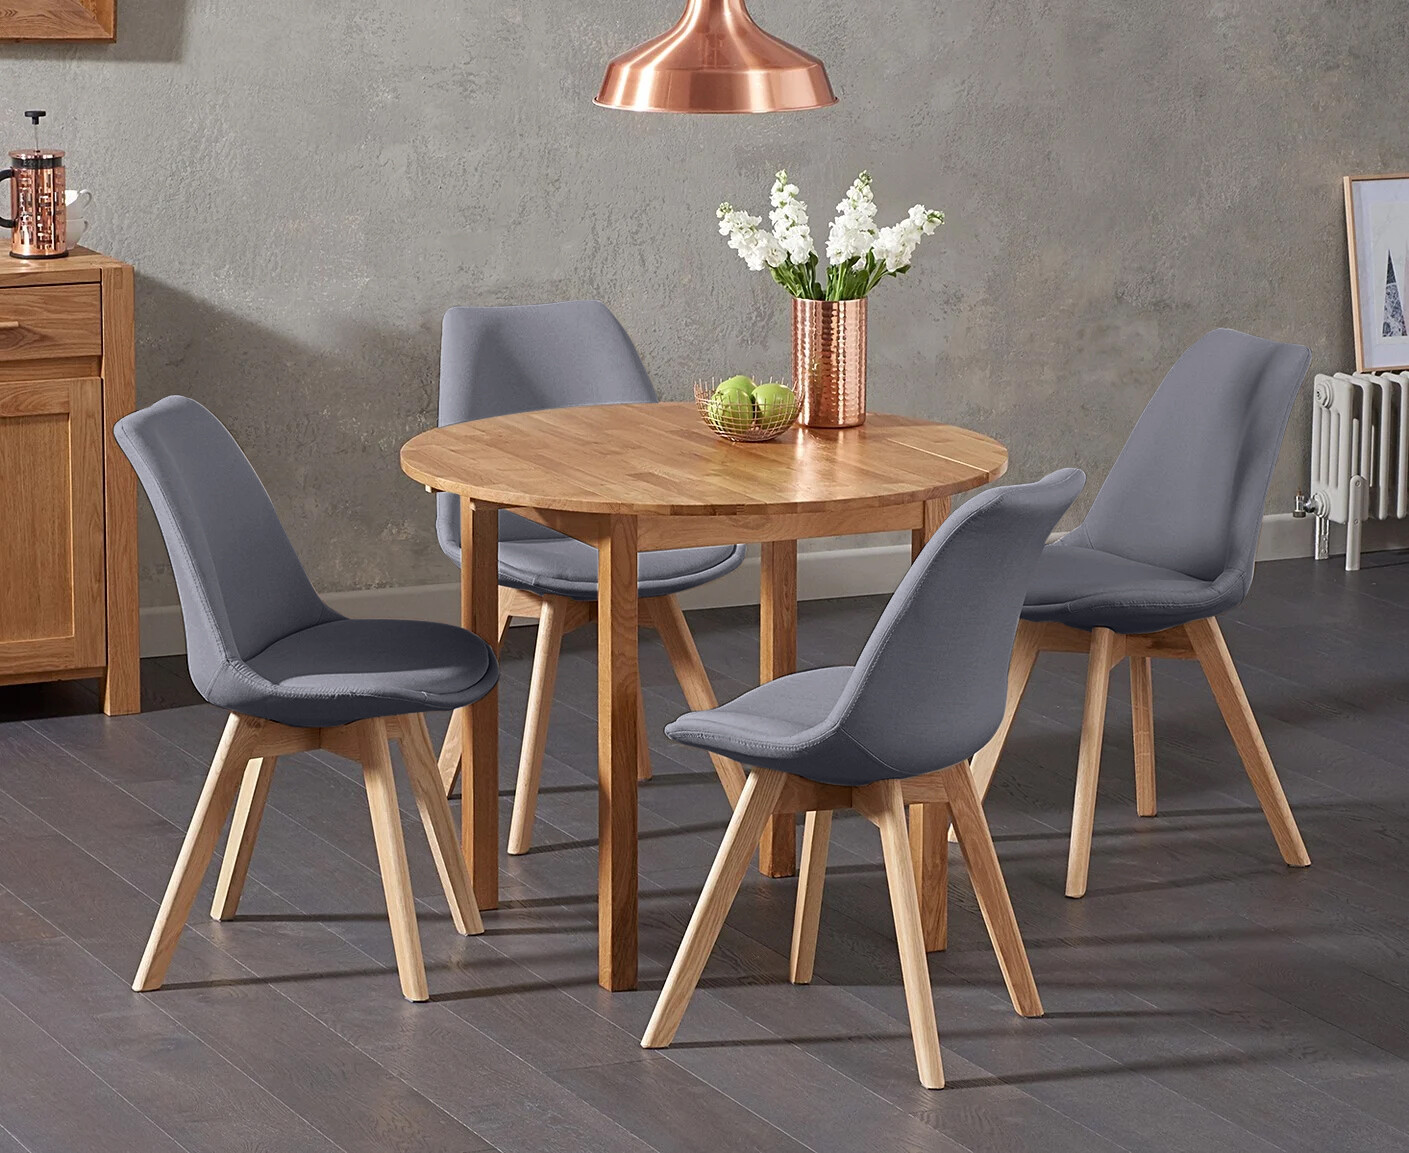 Extending York 90cm Solid Oak Drop Leaf Dining Table With 4 Dark Grey Orson Fabric Chairs